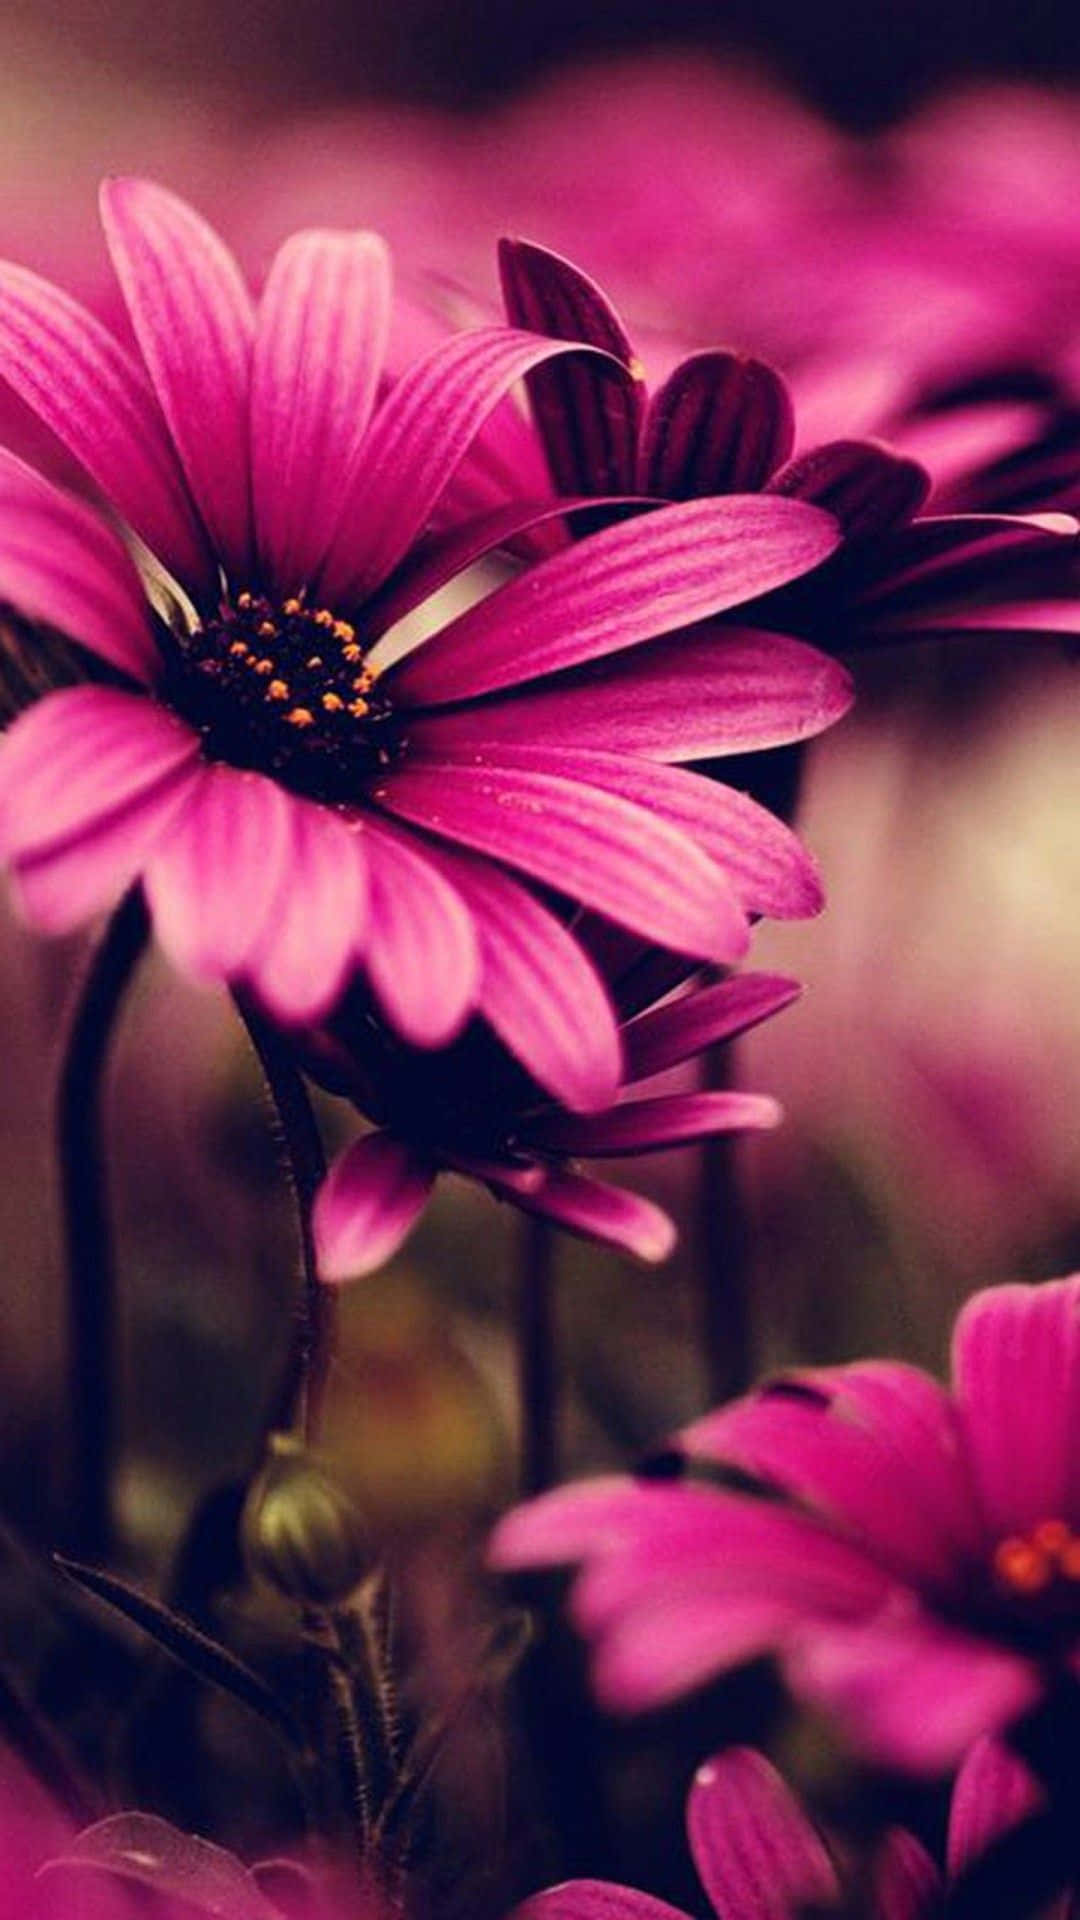 Aesthetic Flowers Black And Pink iPhone Wallpaper